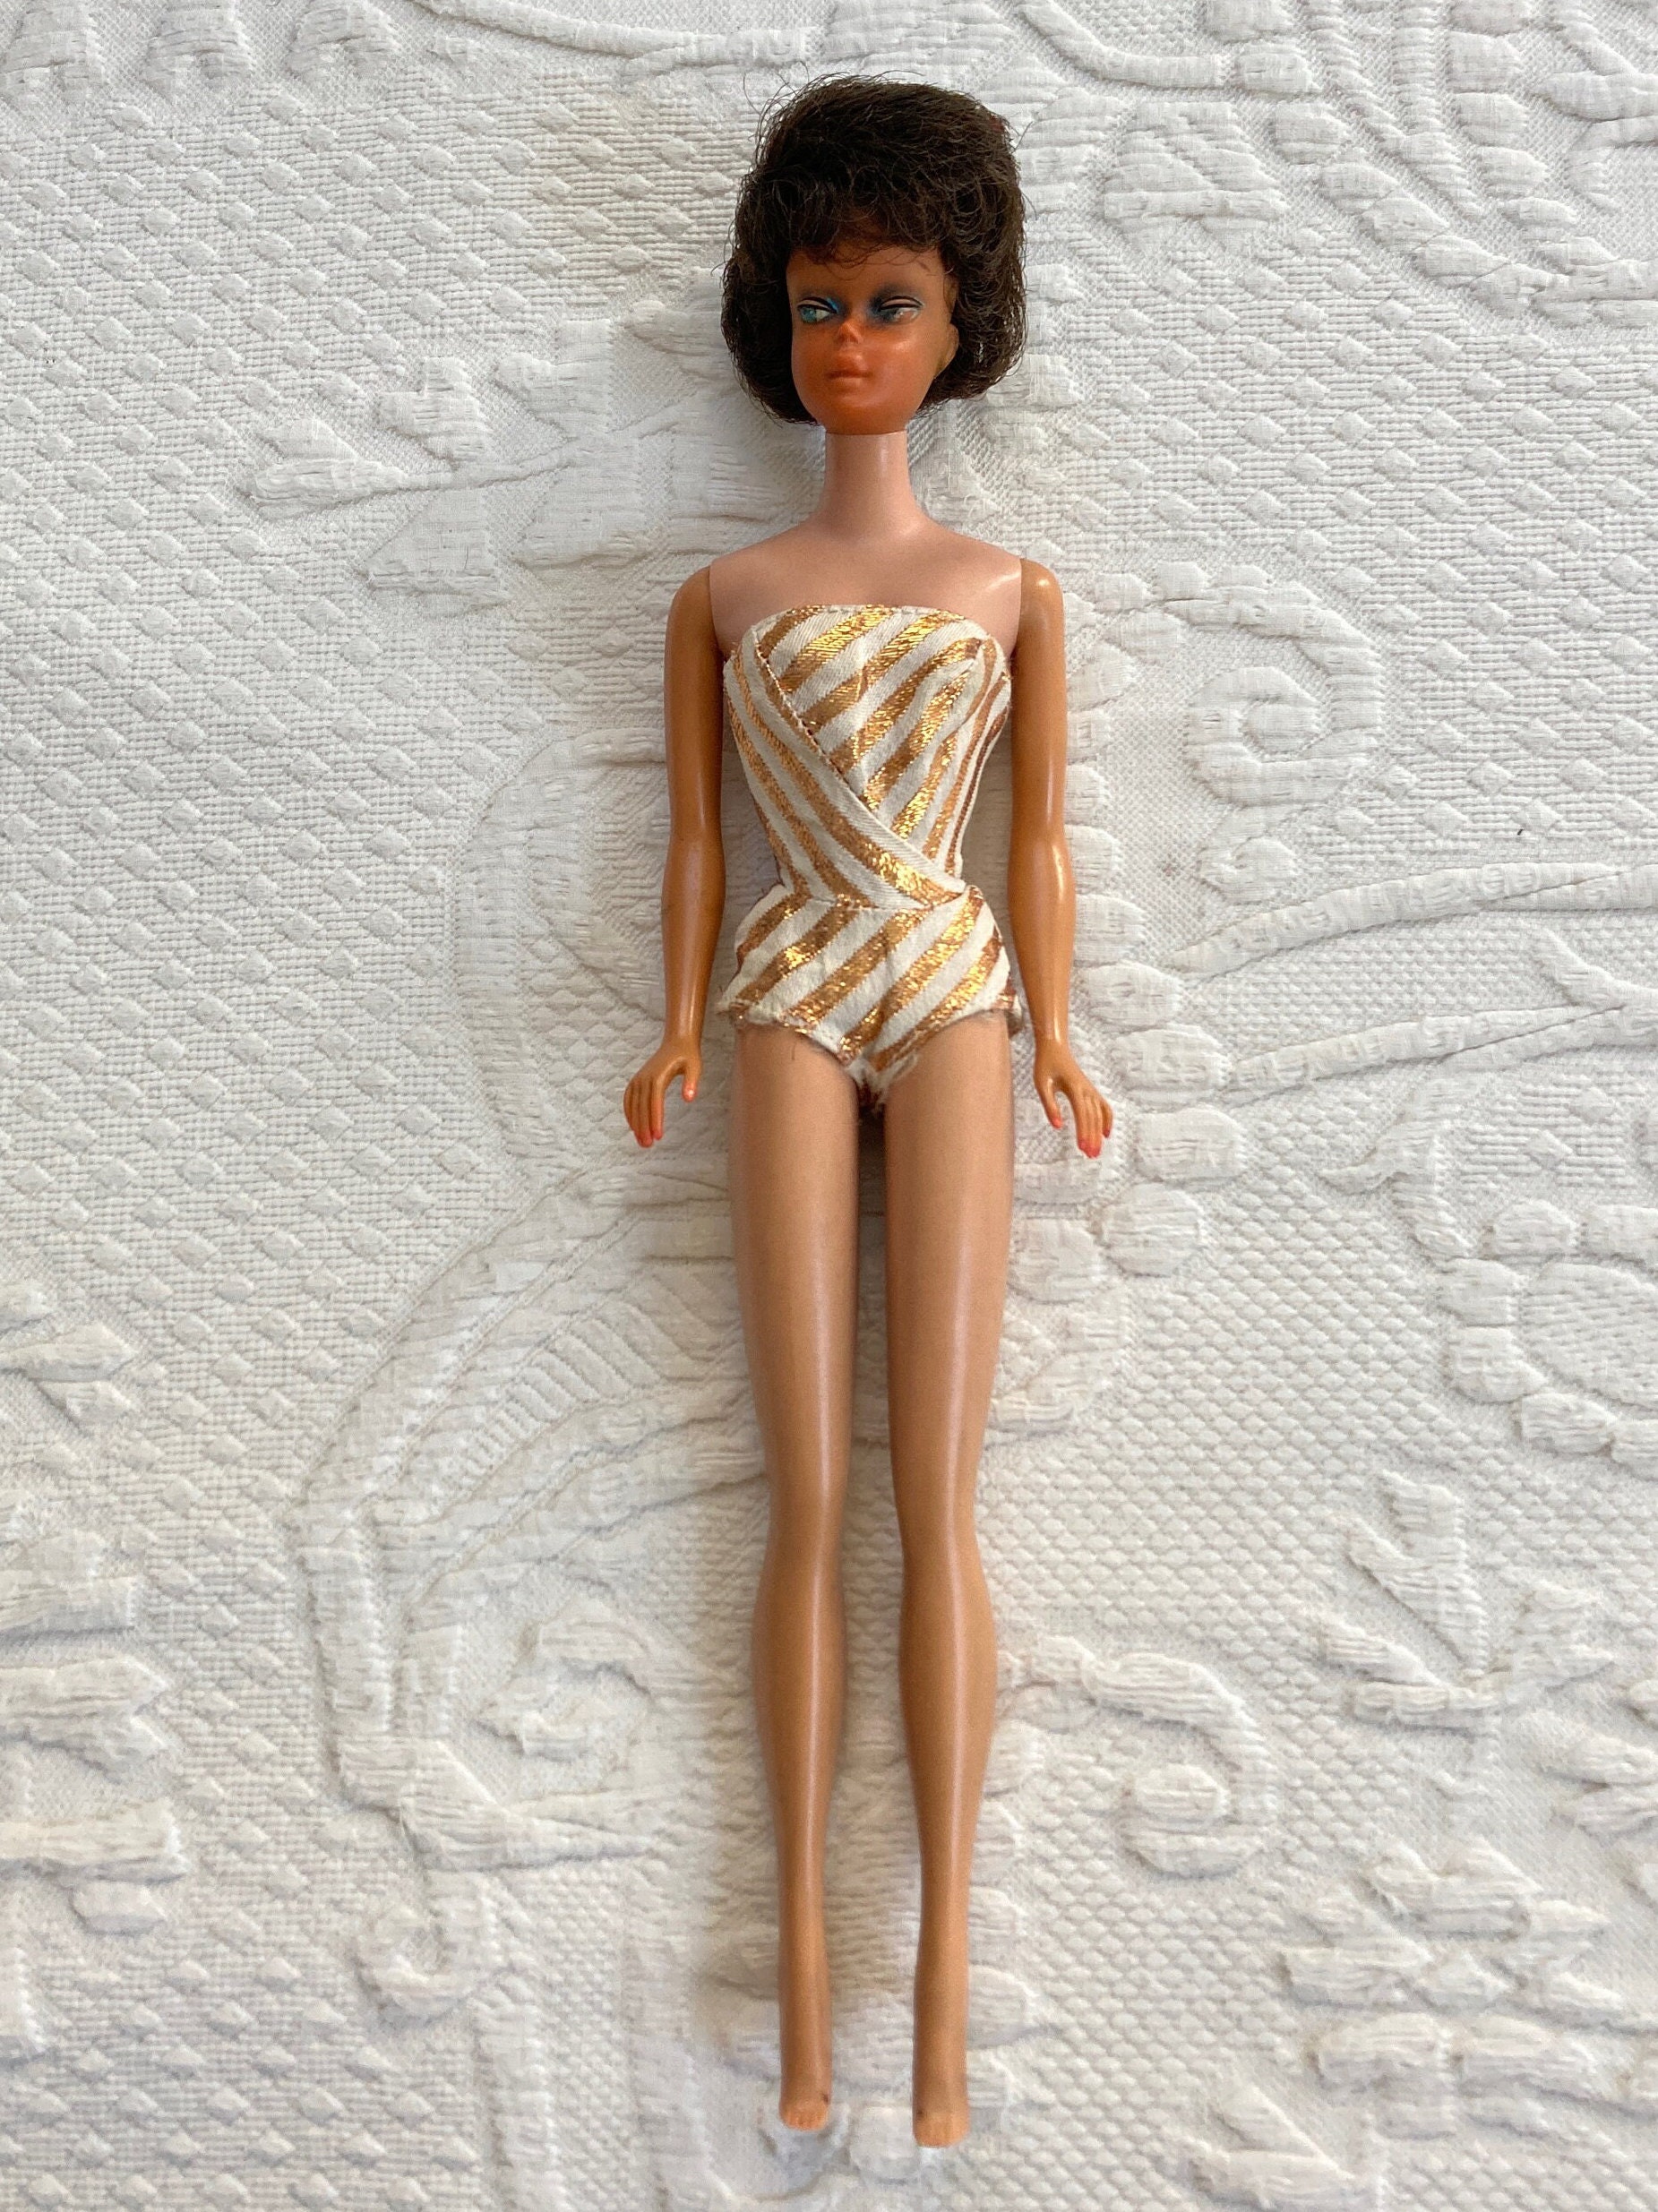 Barbie Looks Doll #15 with Brunette Ponytail